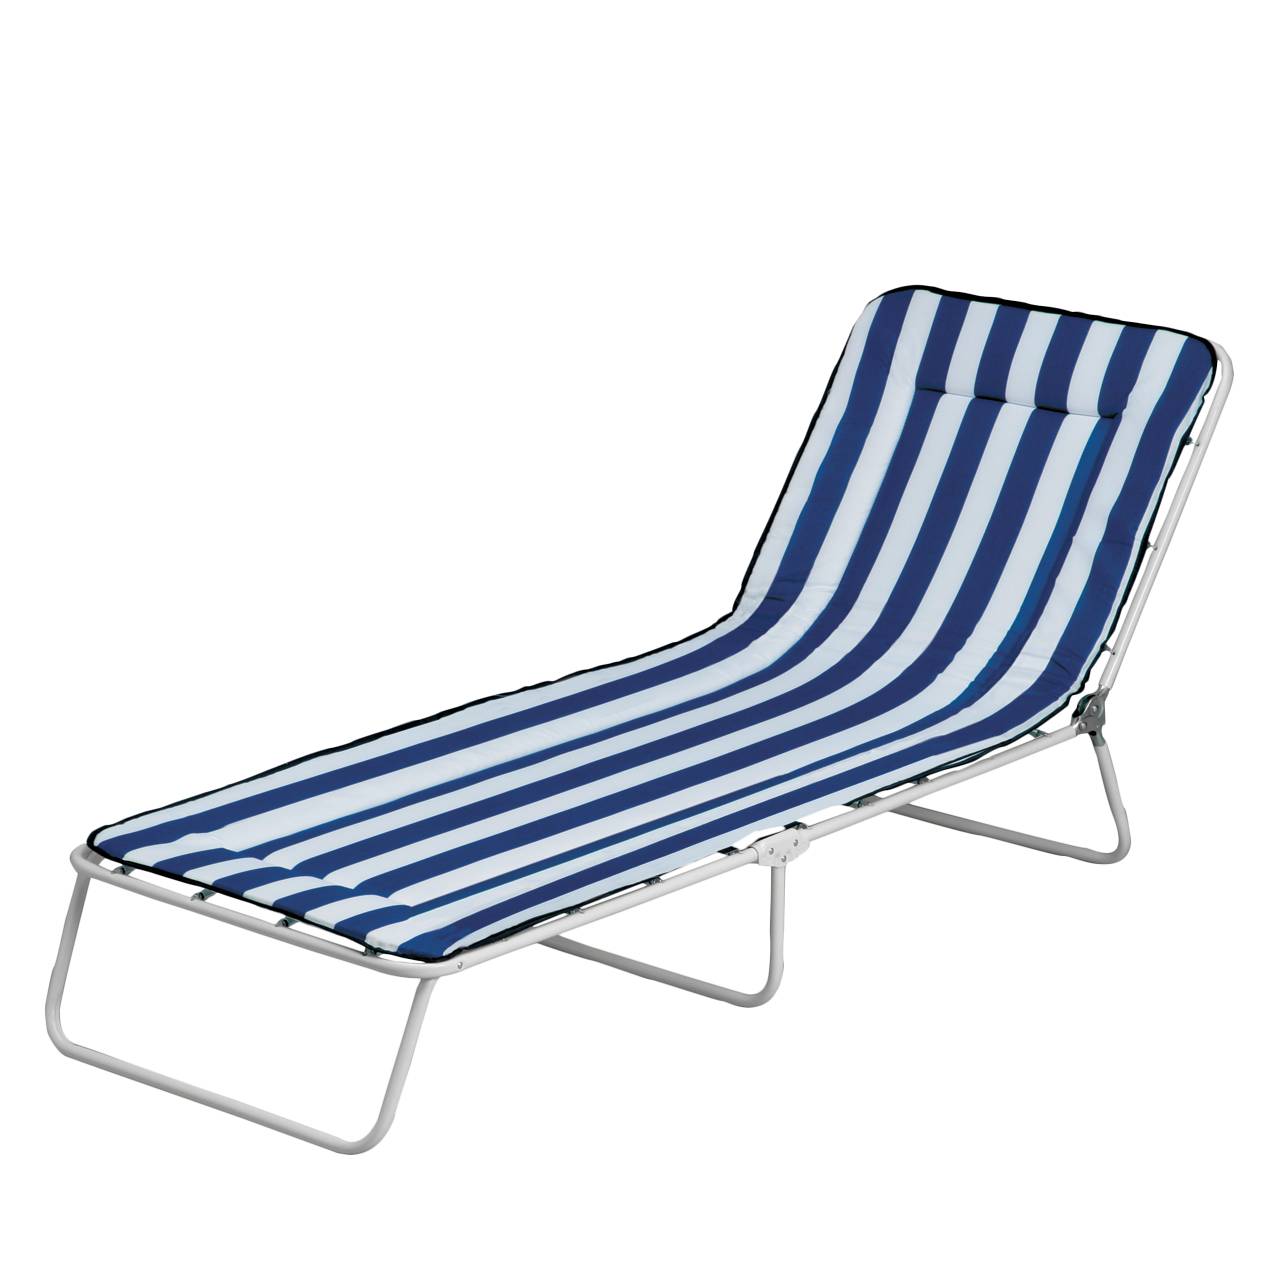 Image of Chaise longue Chiemsee 3 000000001000025407